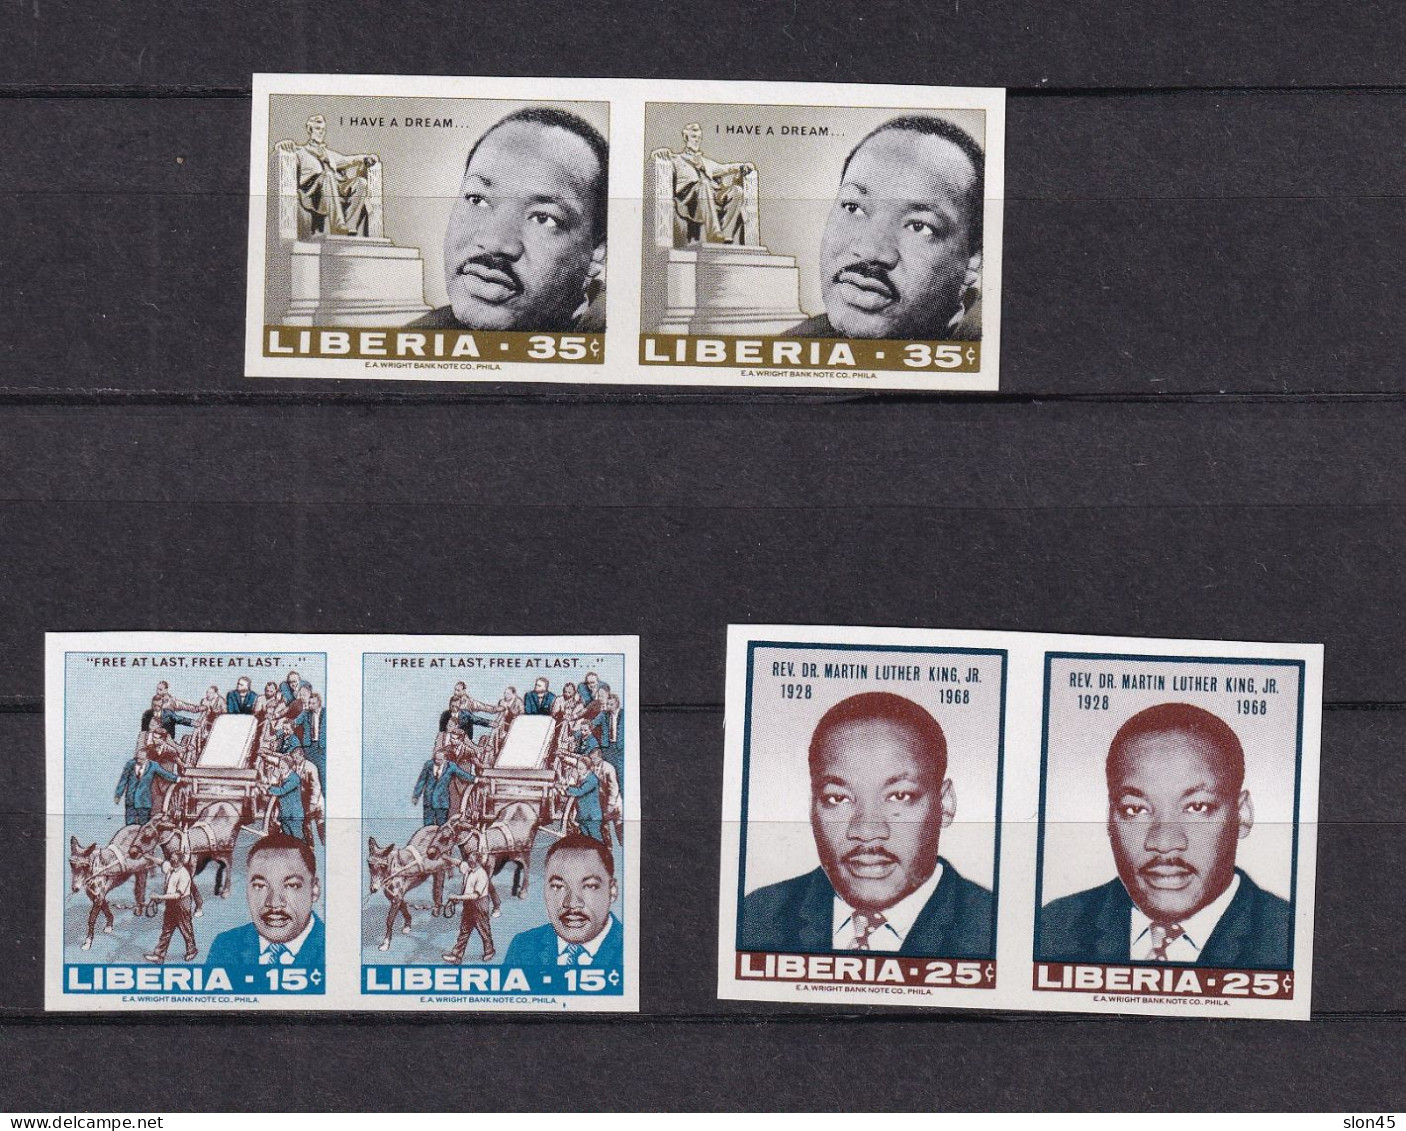 Liberia 1968 Martin Luther King,Jr Imperf Horizontal Pair MNH 15518 - Martin Luther King